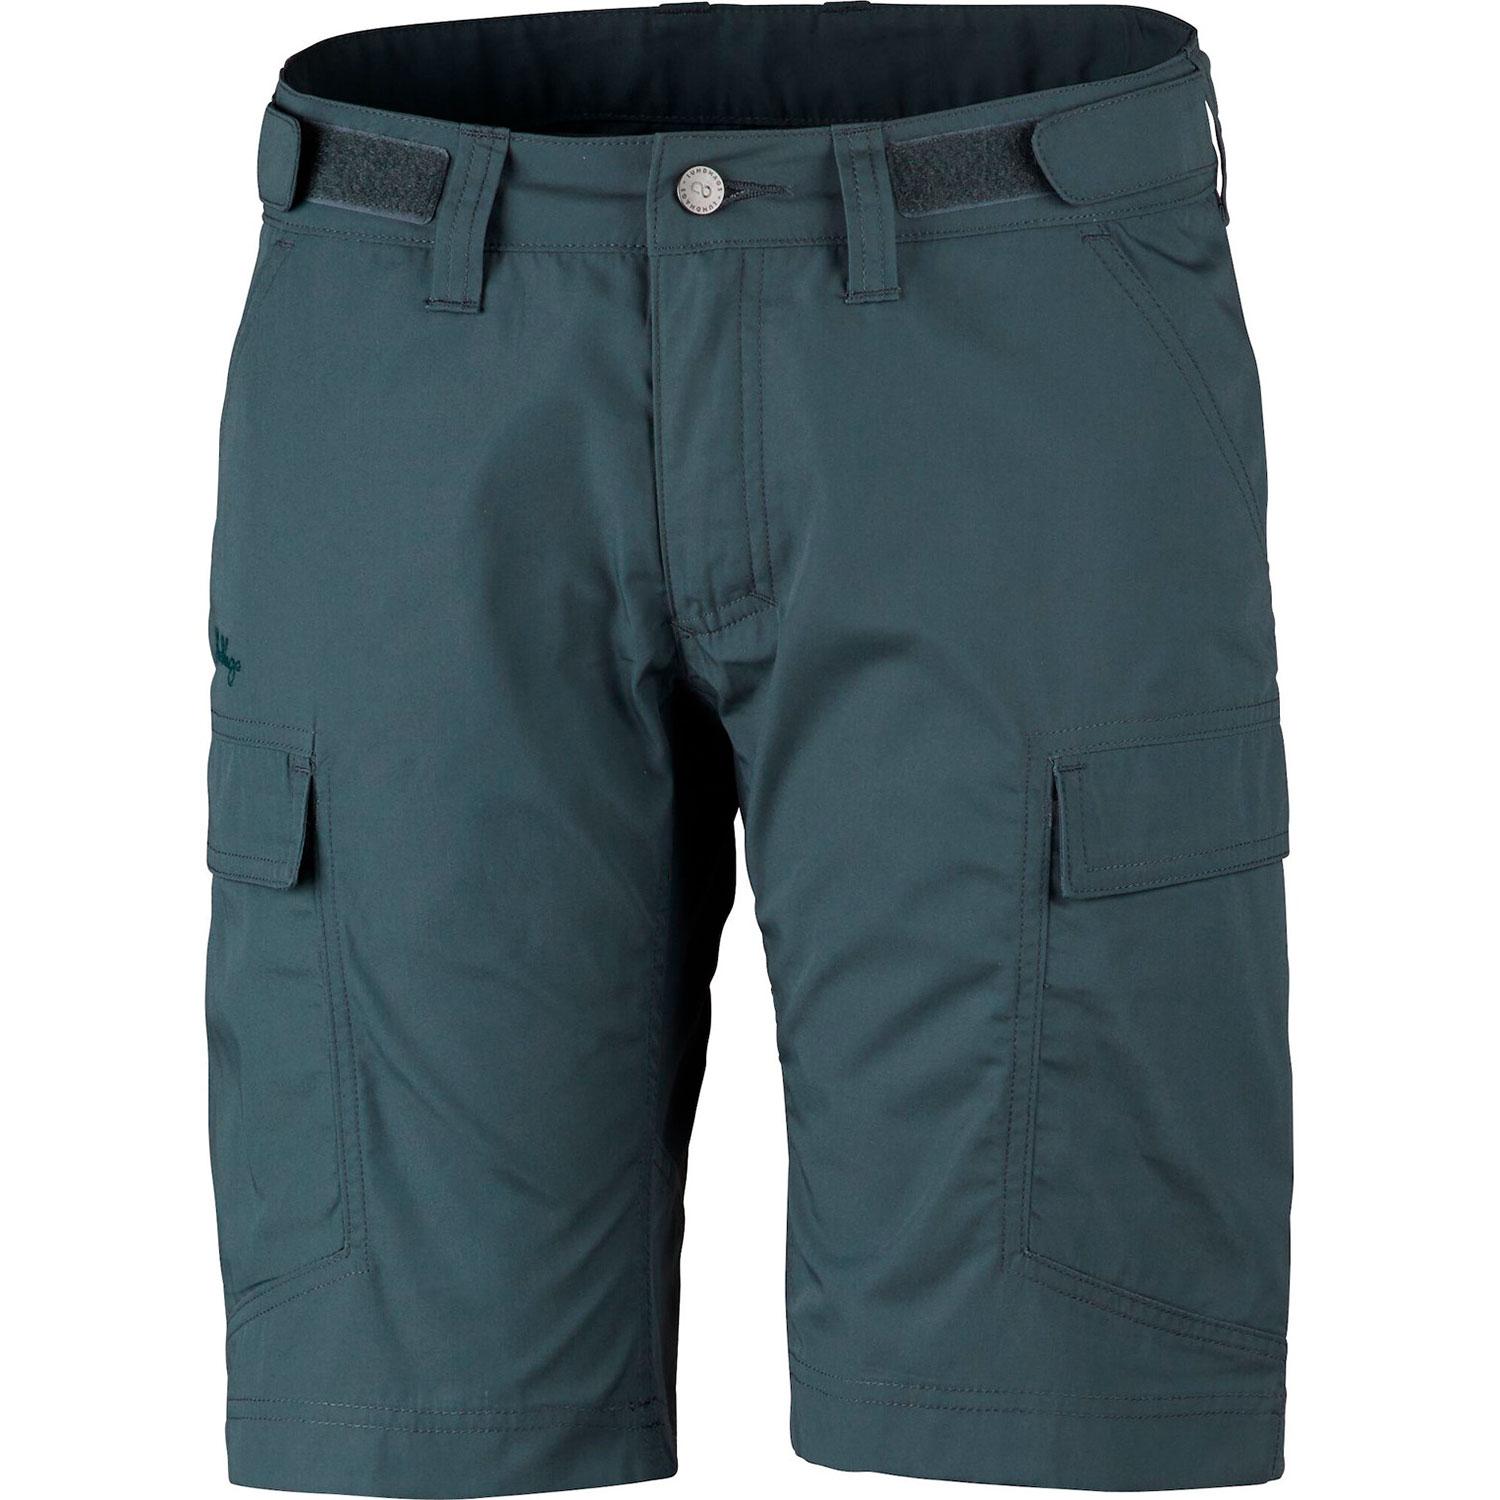 Lundhags Vanner WS dame shorts